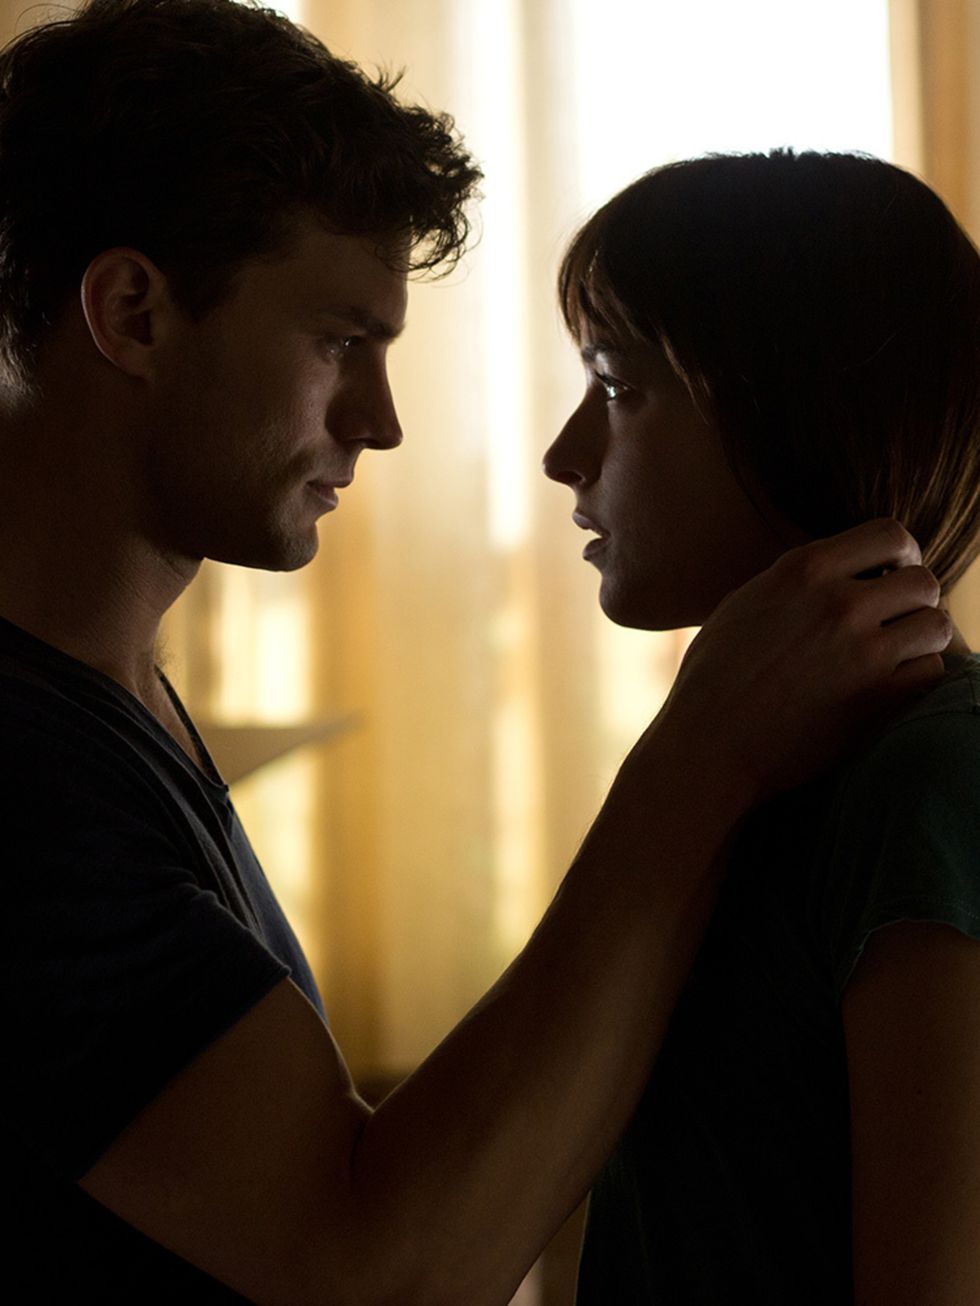 <p><strong>FILM:</strong> <strong>Fifty Shades of Grey</strong></p>

<p>Handcuffs, bondage and a red room of pain; you can expect it all from E.L. James S&M plagued film adaptation of Fifty Shades of Grey which is set to be one of the steamiest films o